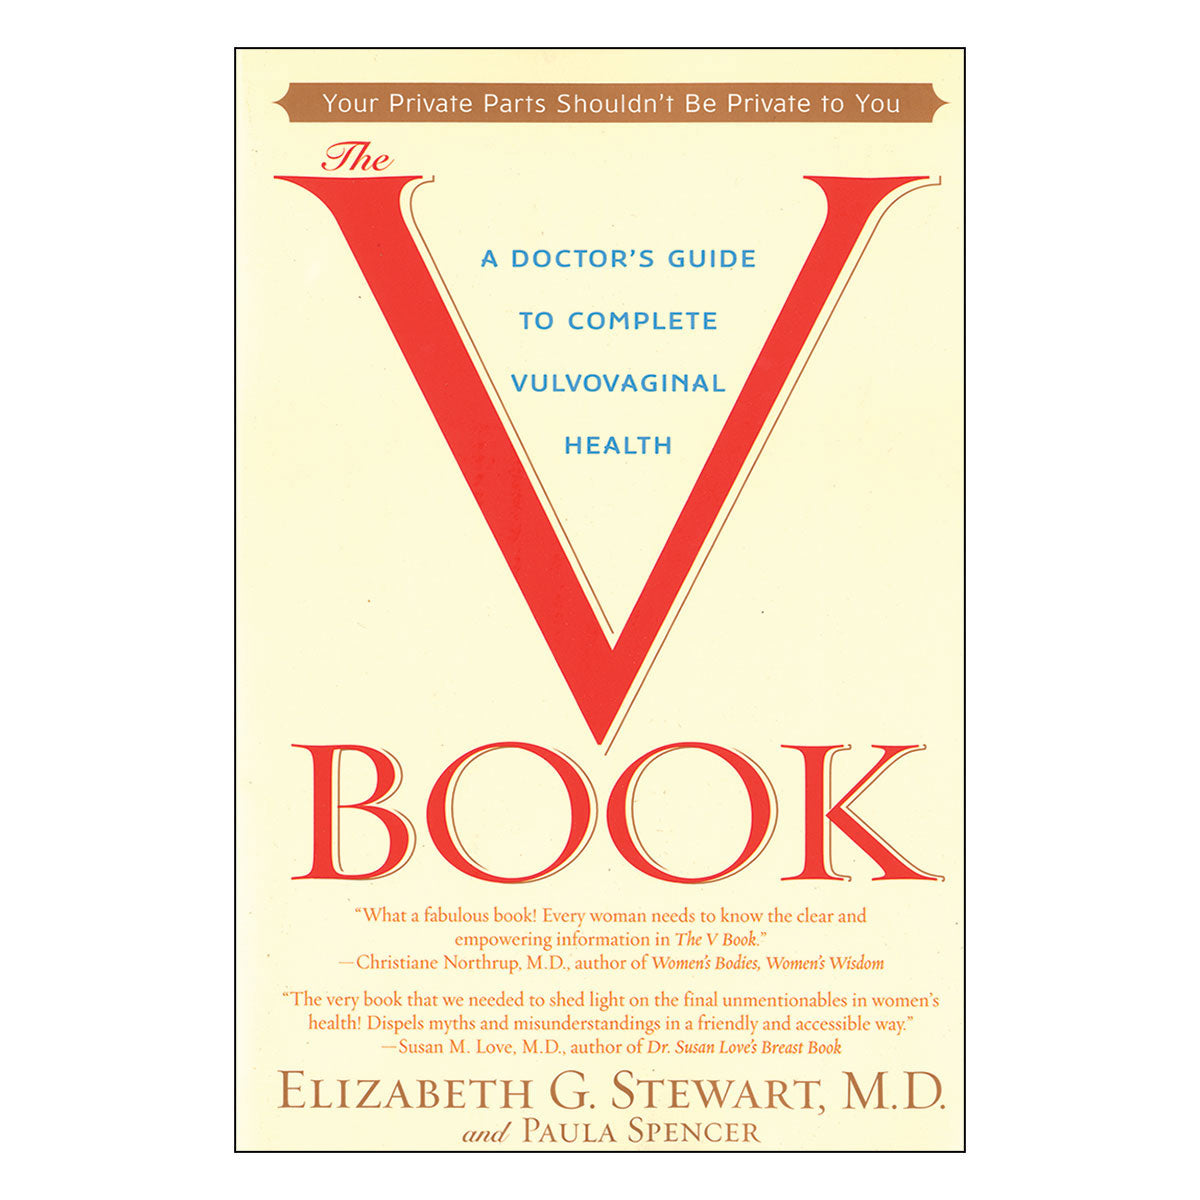 V Book: A Doctor's Guide to Complete Vulvovaginal Health - Bantam